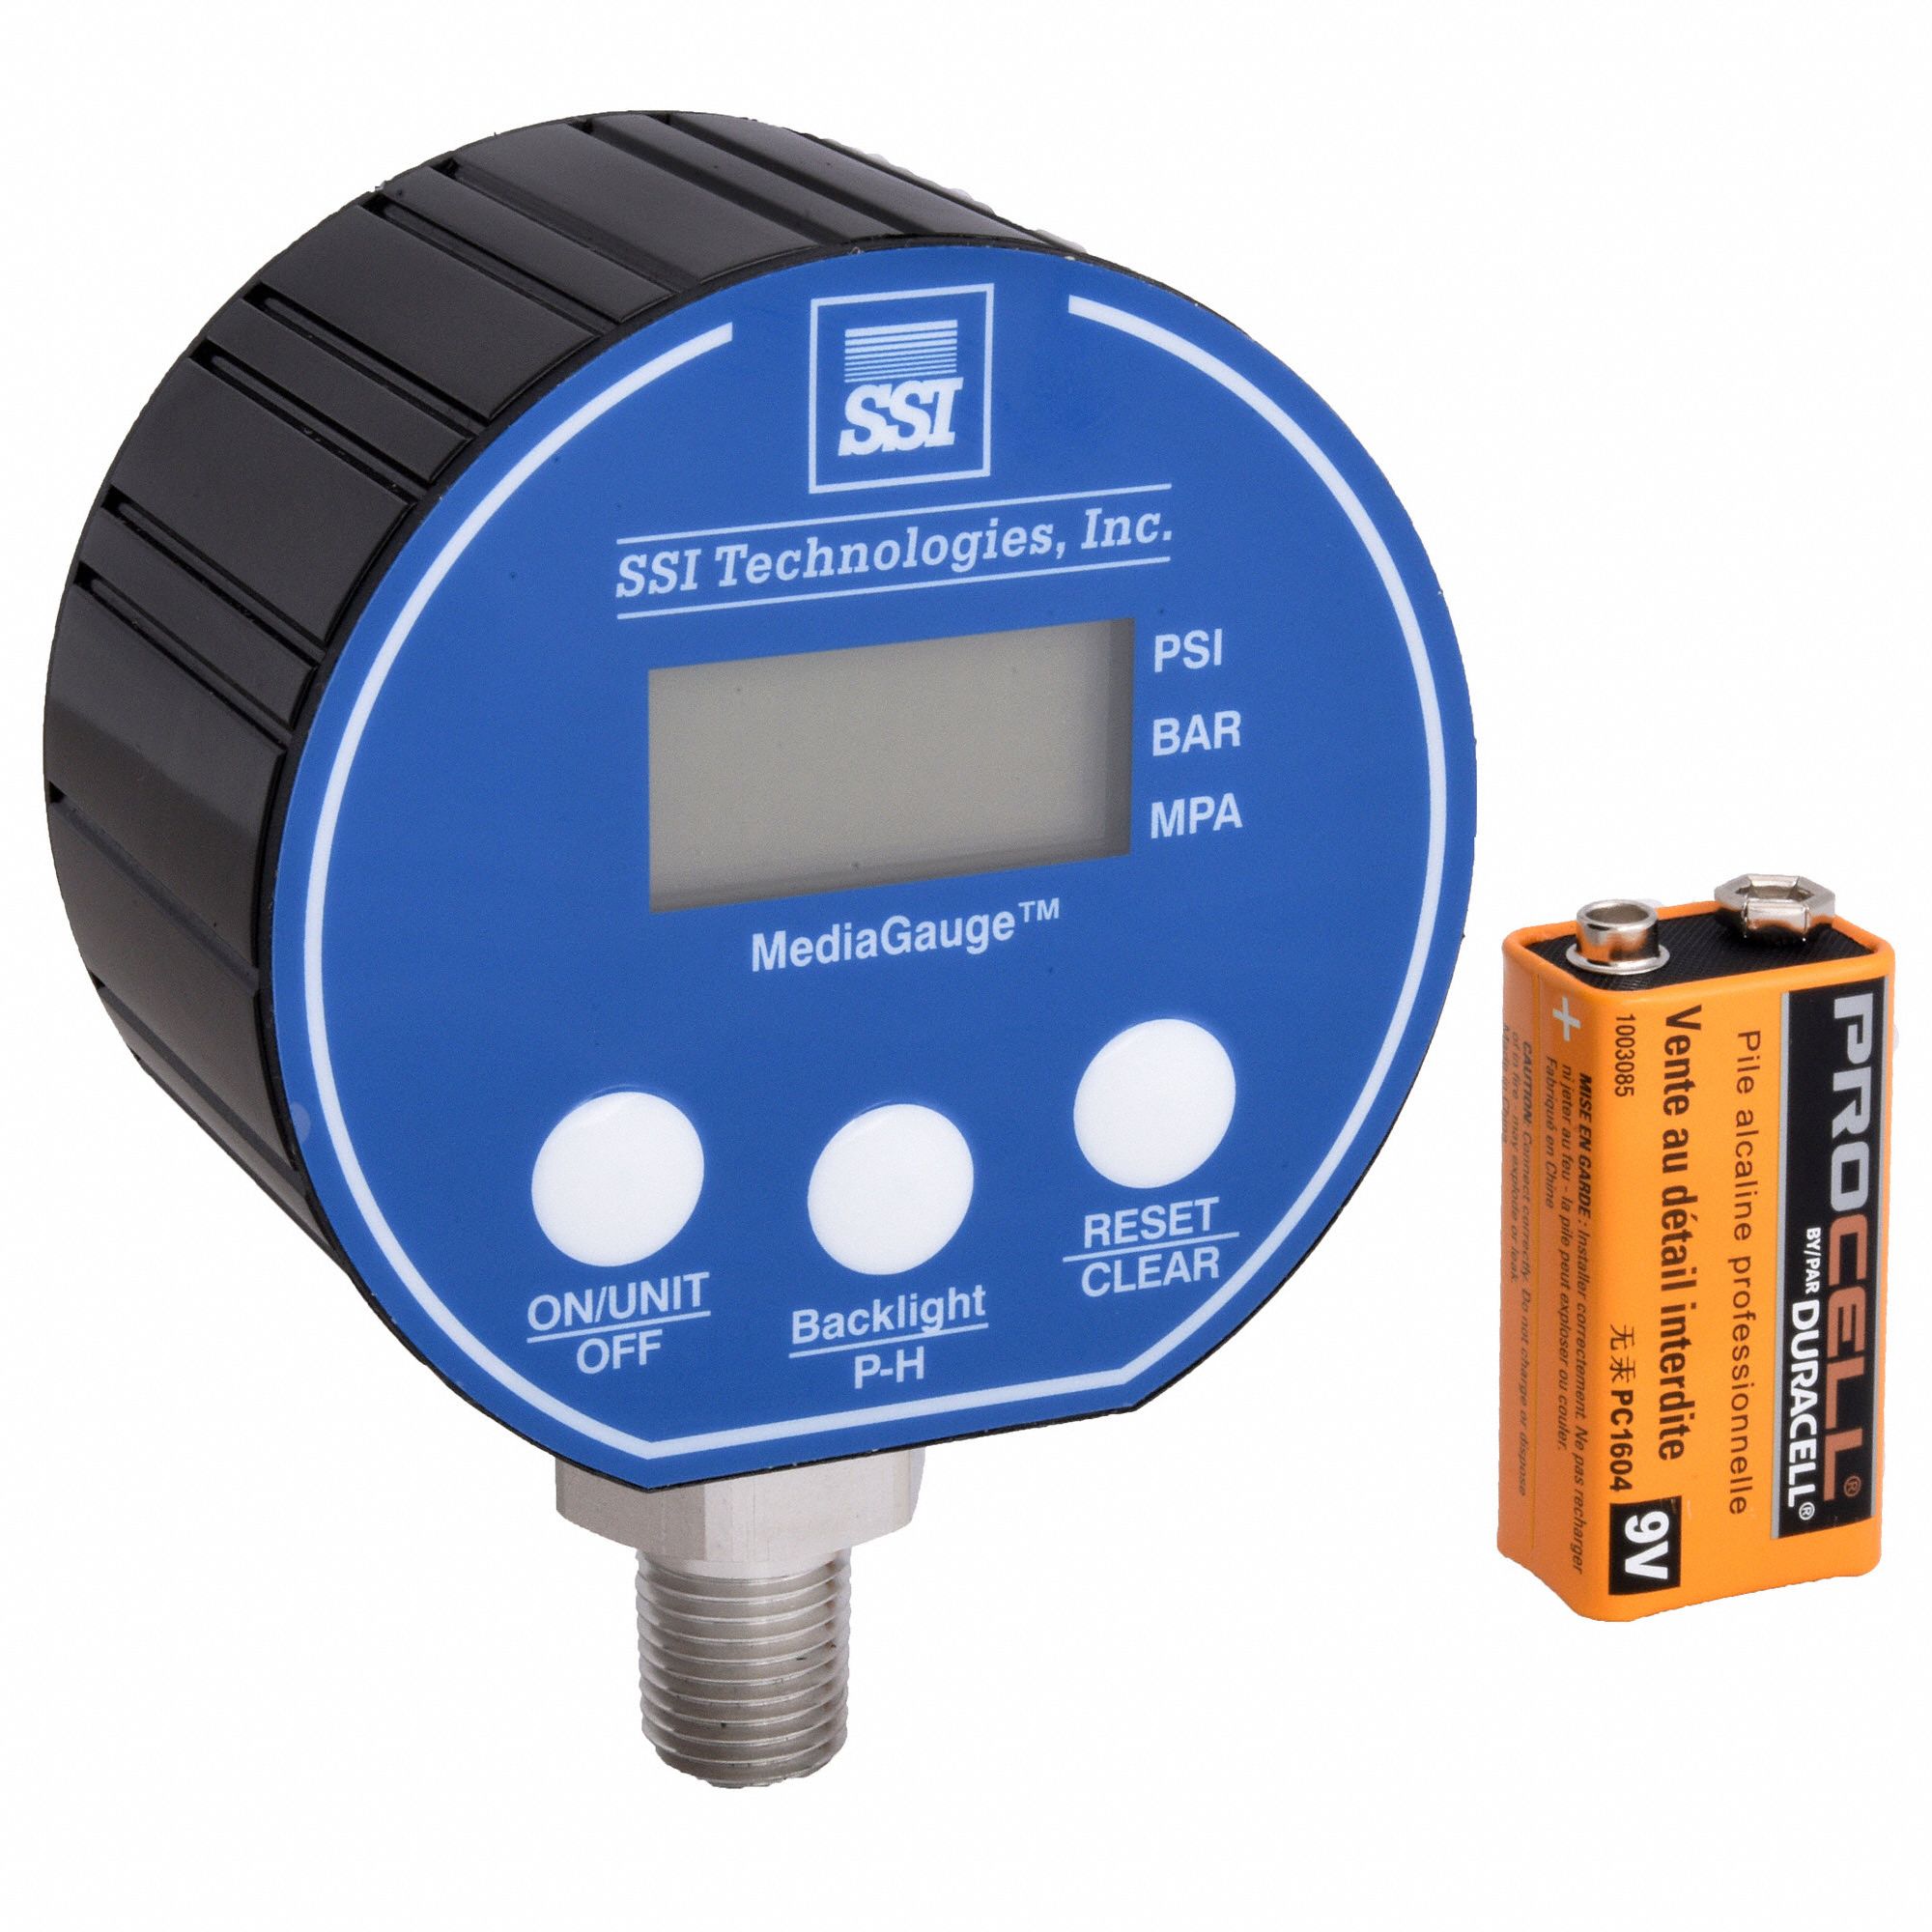 Ssi Mg-100-A-Md-R Digital Pressure Gauge With Transmitter 0 To 100 Psi 1/4 In 